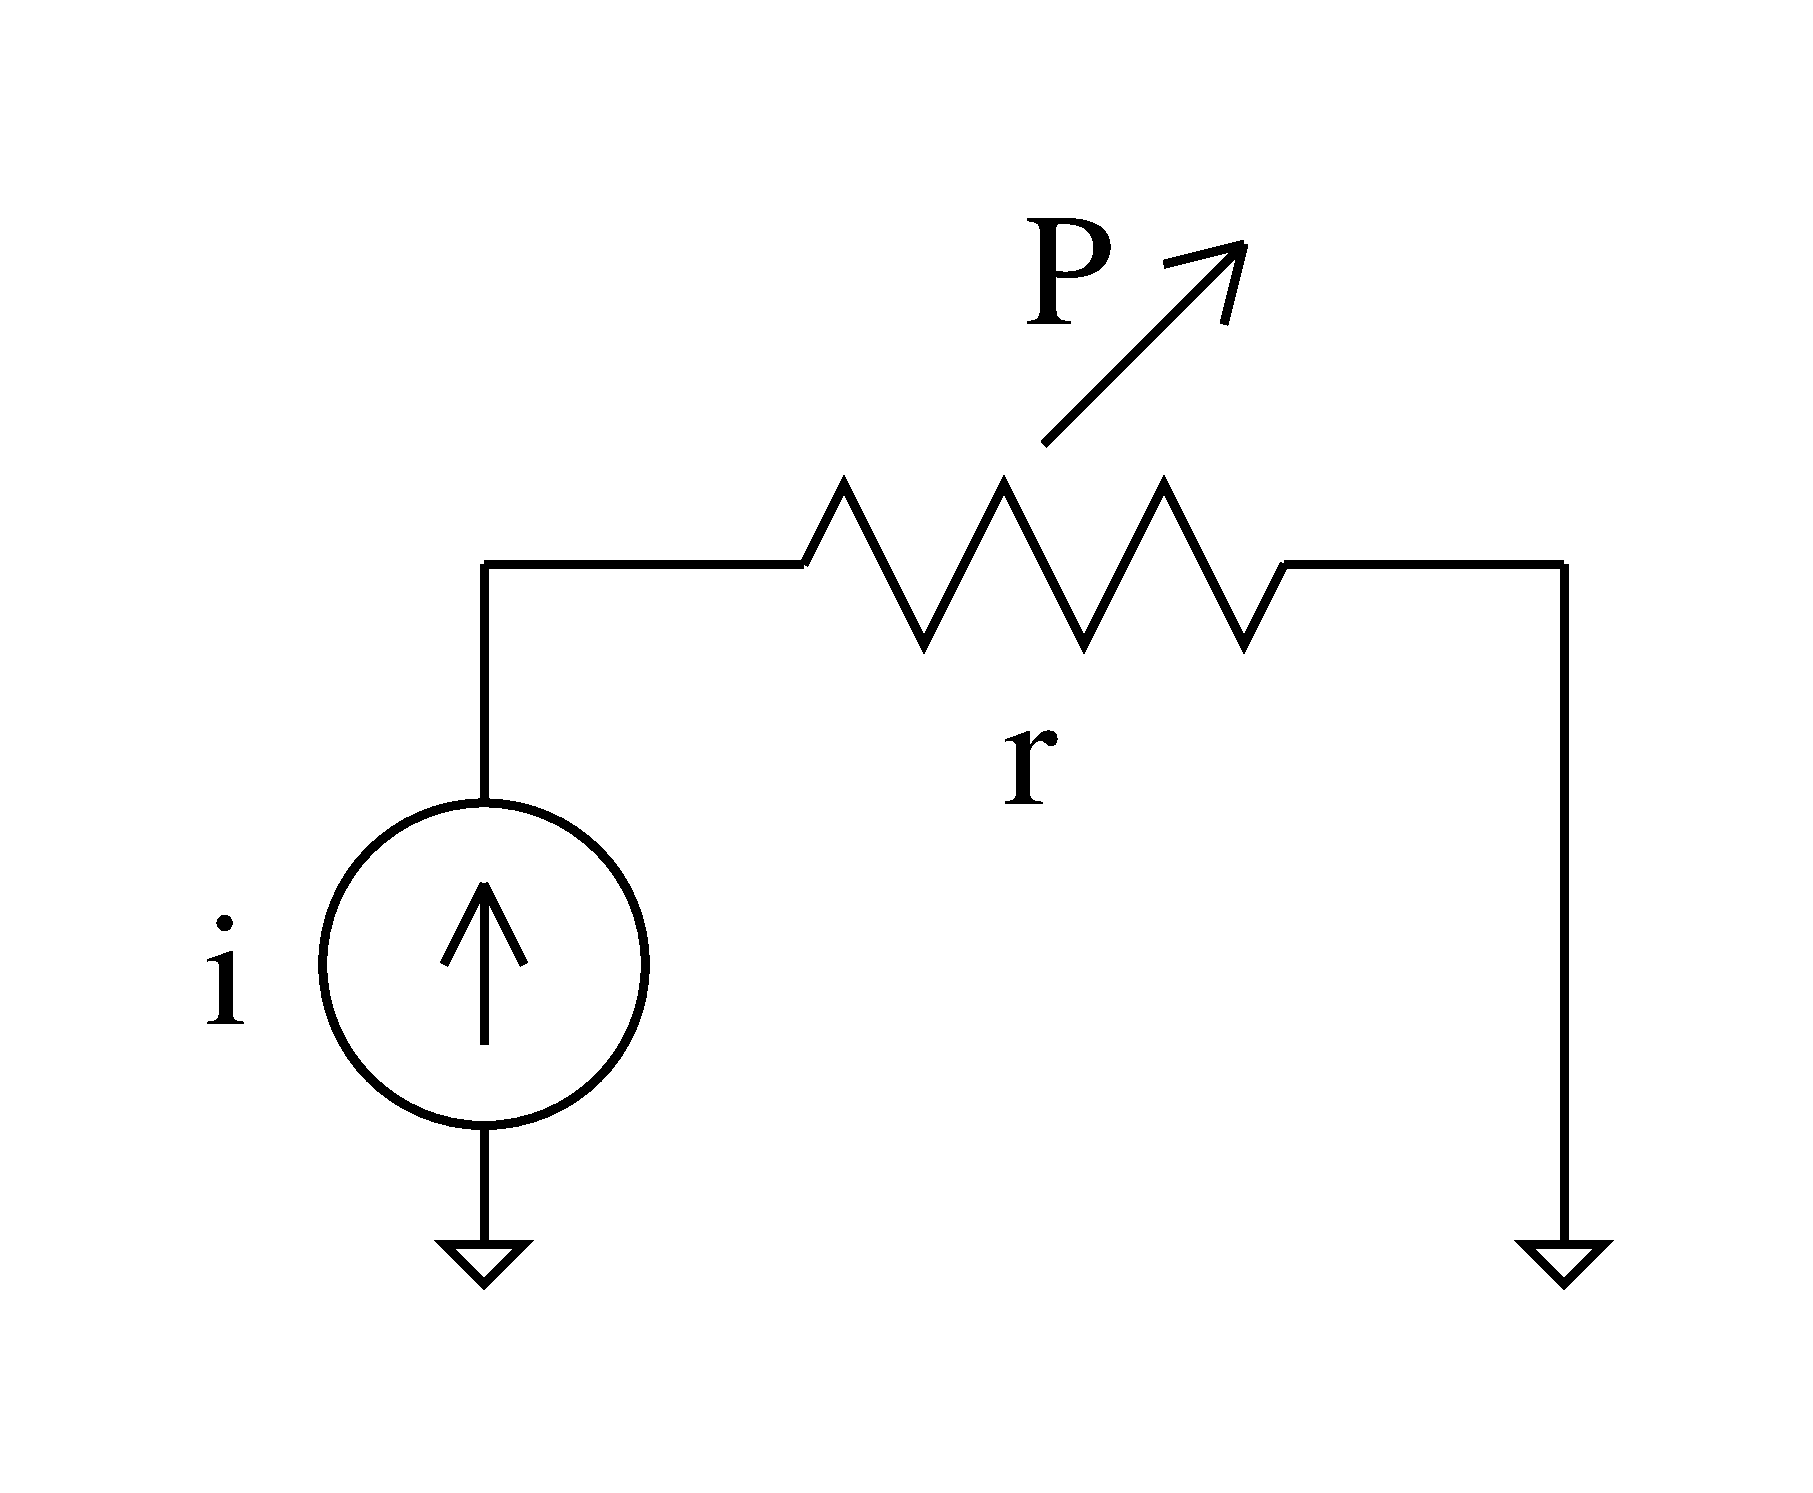 Electrical model